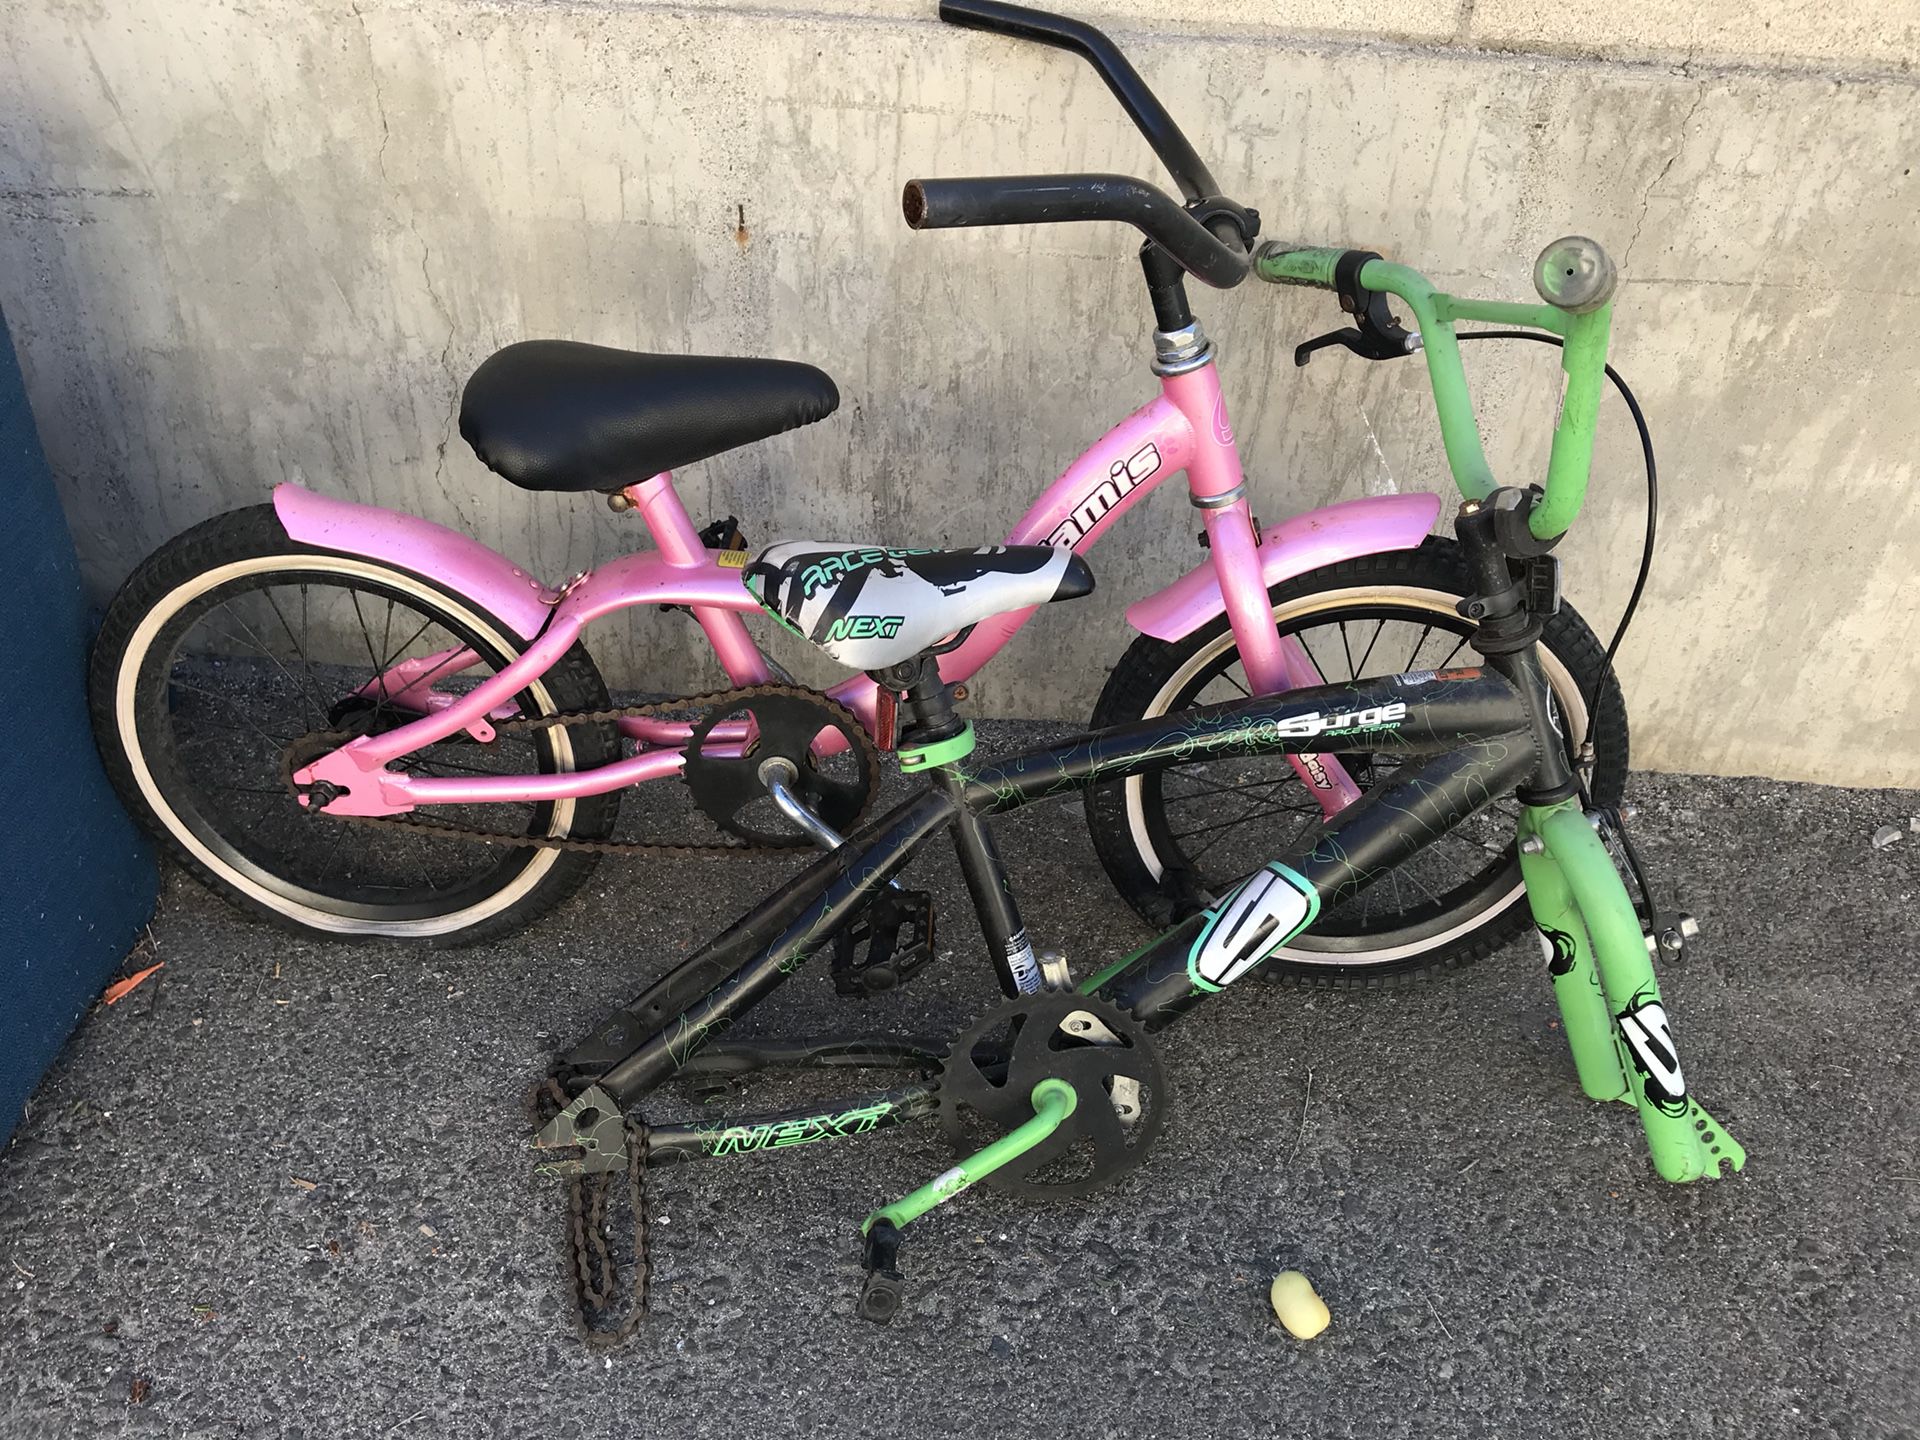 FREE miss daisy and green bike. For parts